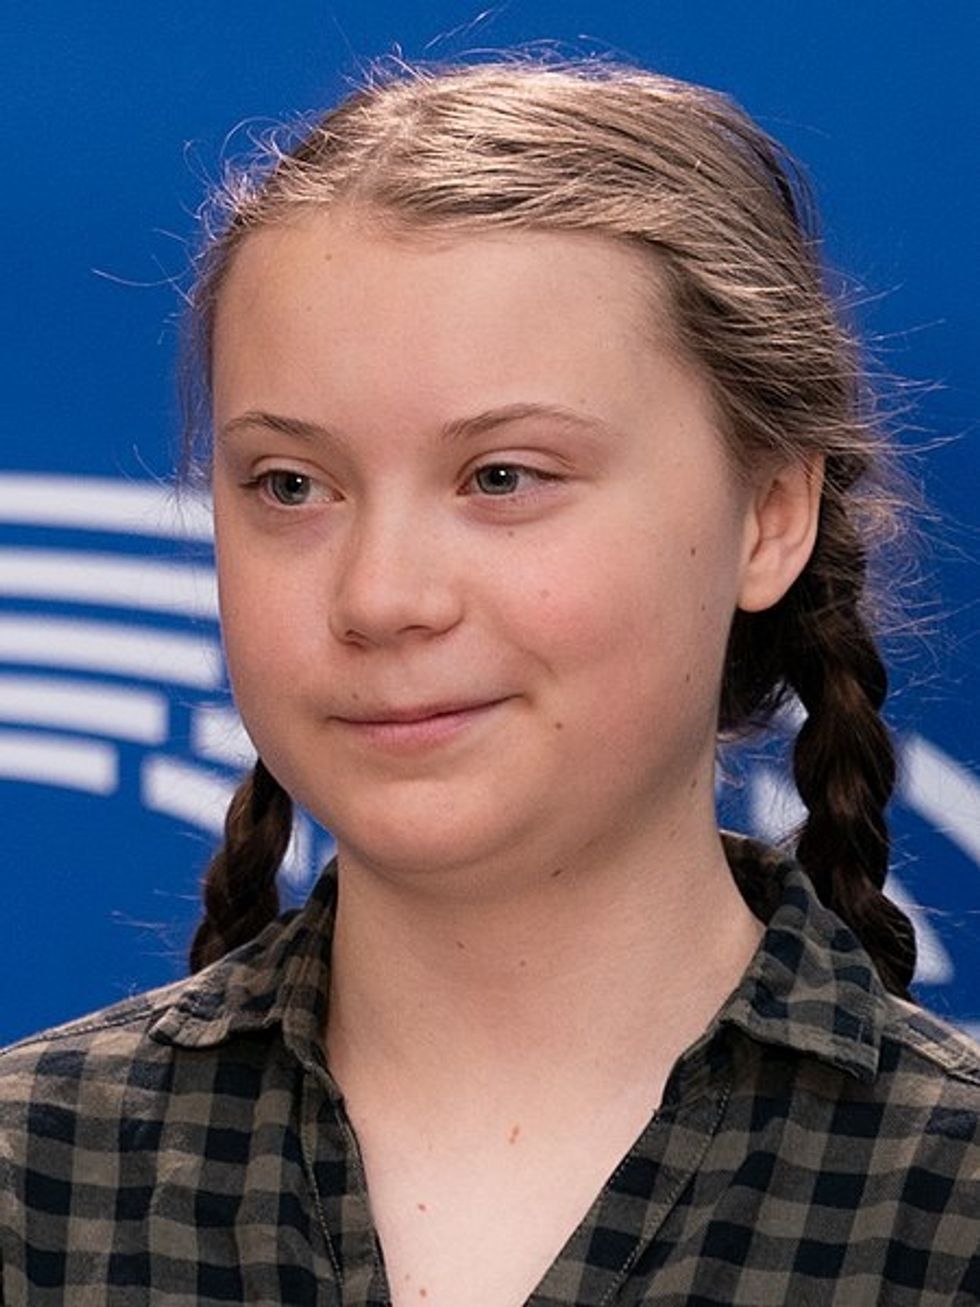 Why The Conservatives Hate Greta Thunberg